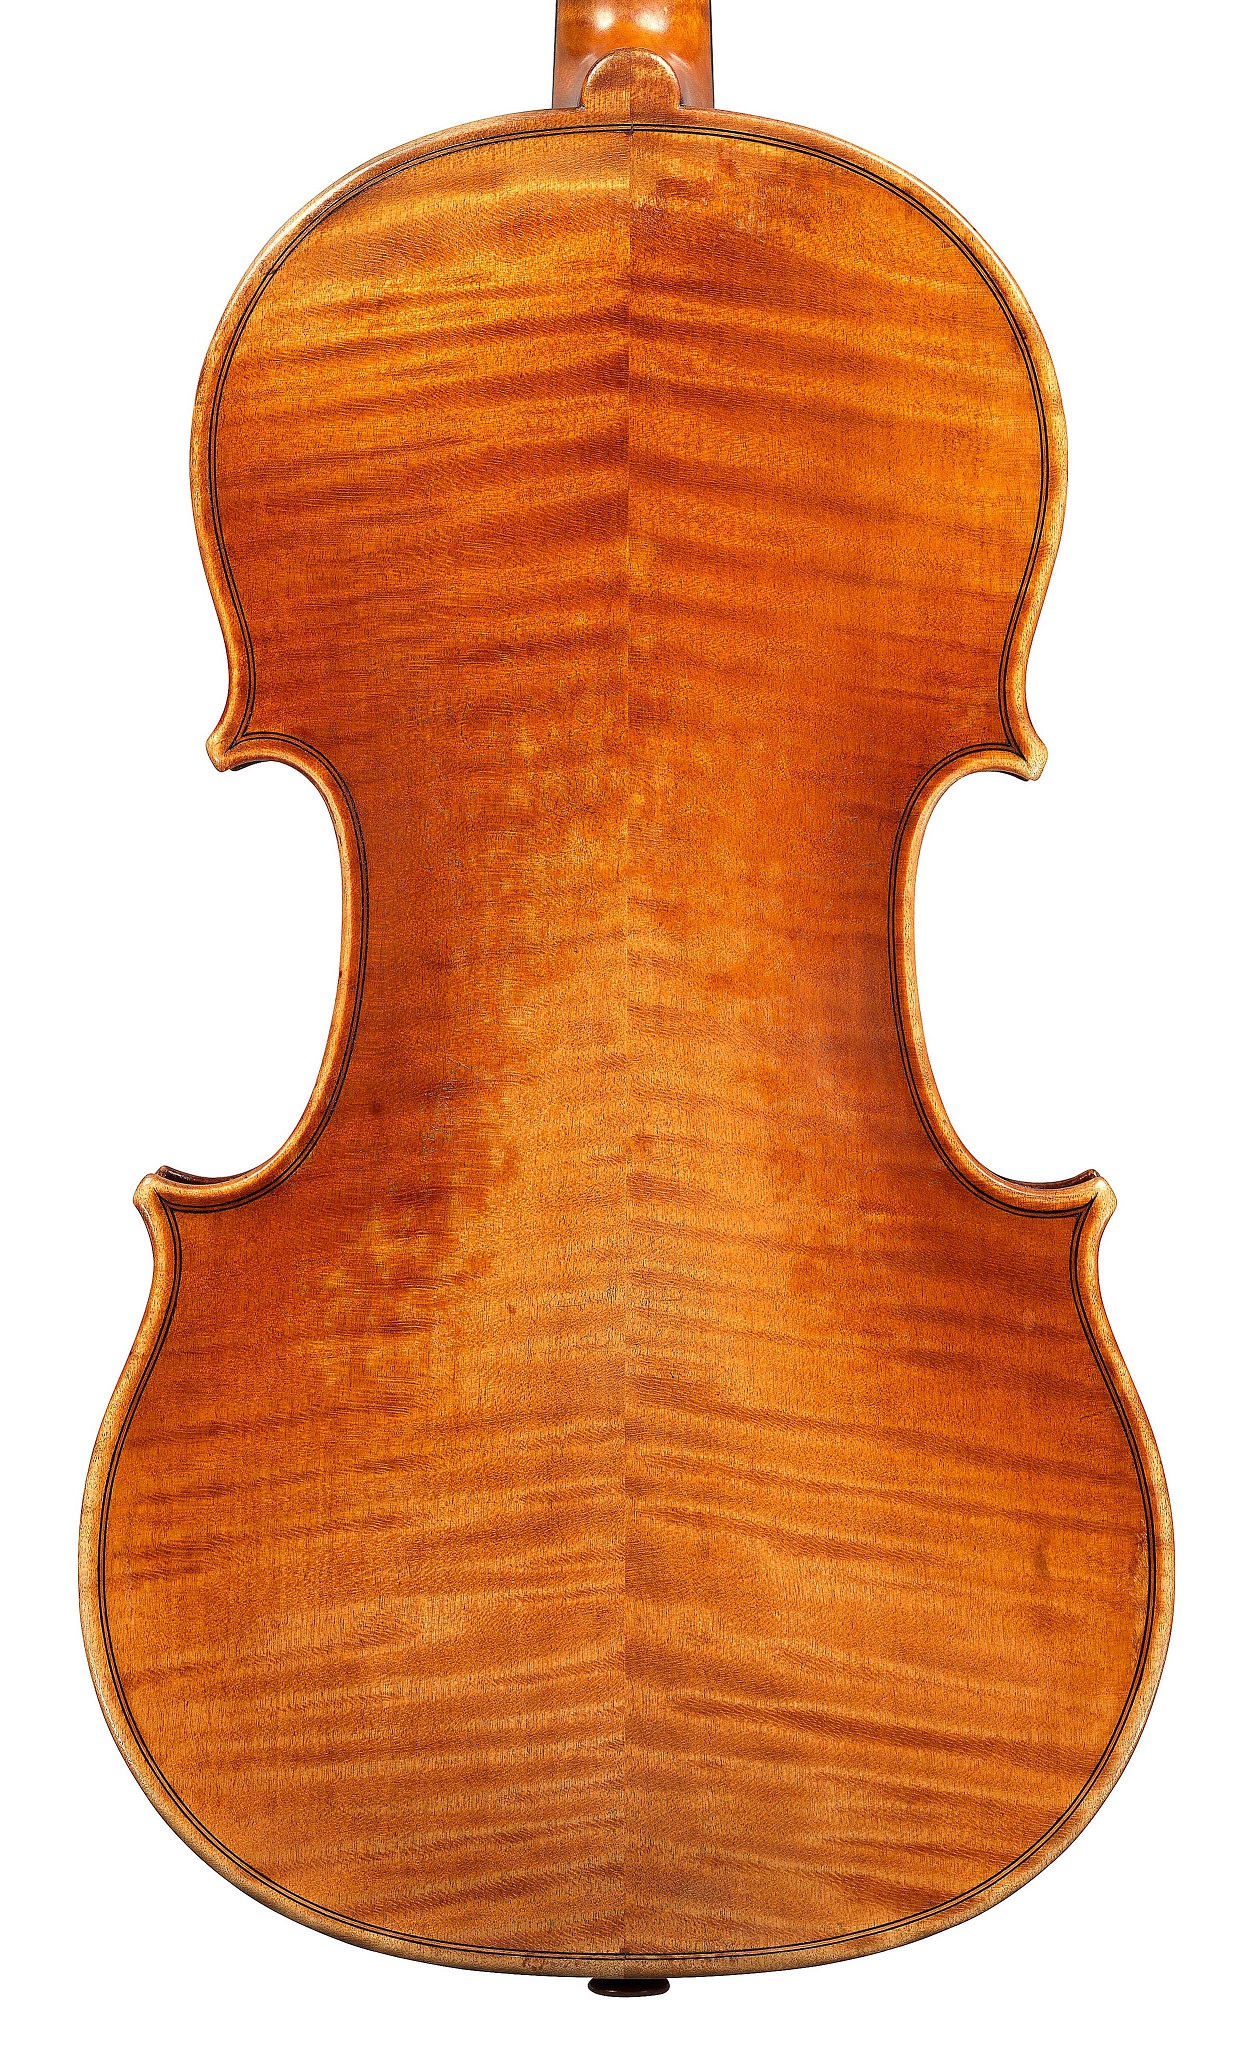 Back of ex-Sin JB Vuillaume, 1865 exhibited by Ingles & Hayday at Sotheby's in 2012